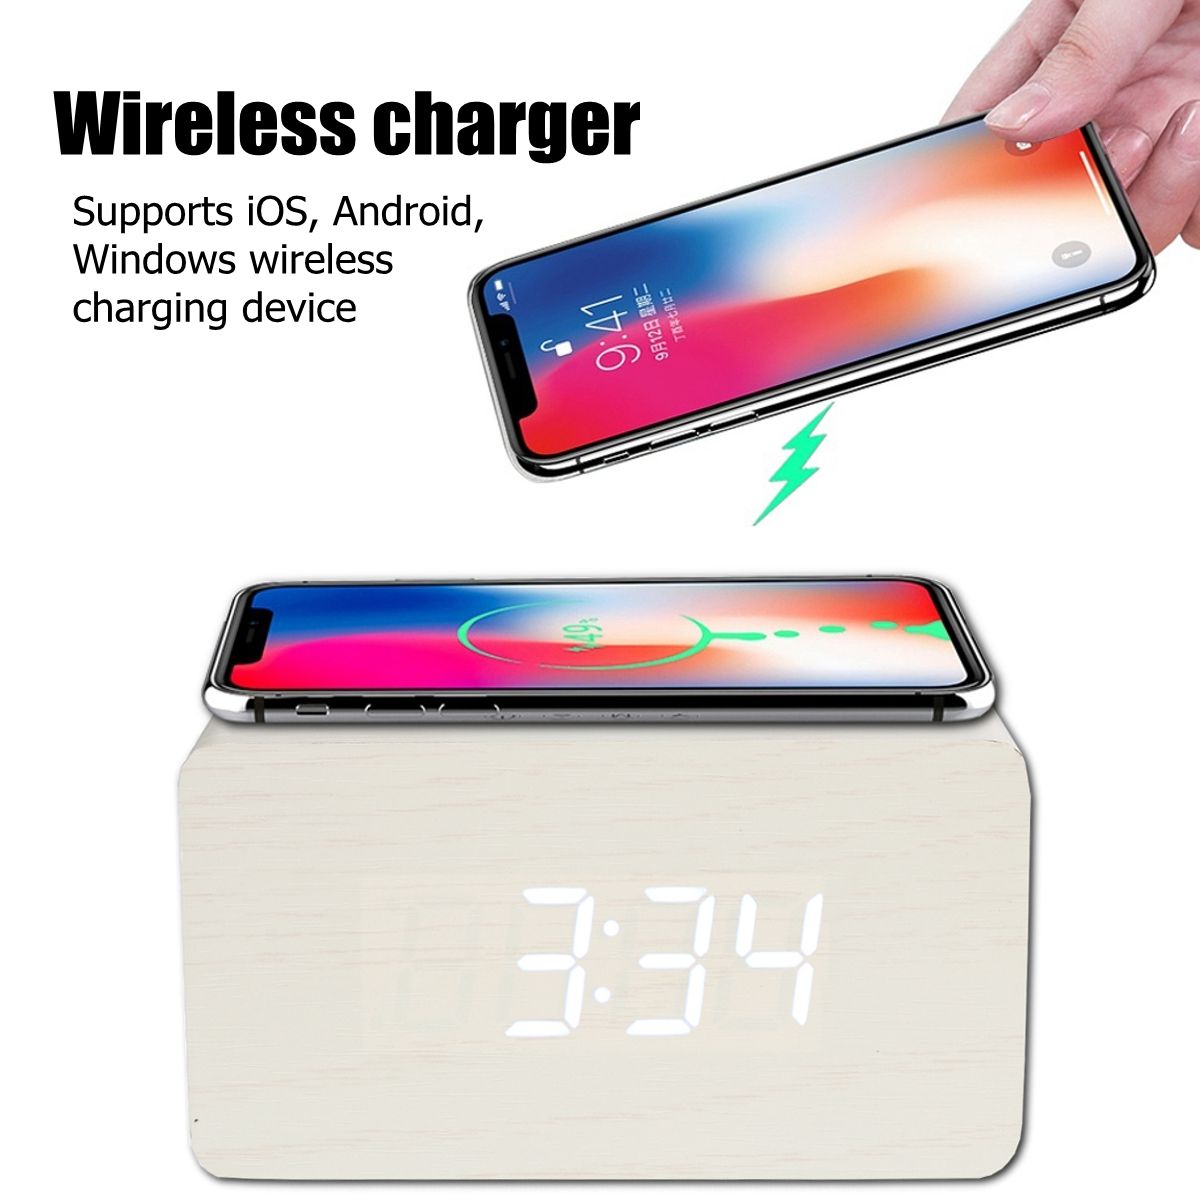 Digital-Thermometer-LED-Desk-Alarm-Clock-With--Wireless-Charger-For-Phone-1587803